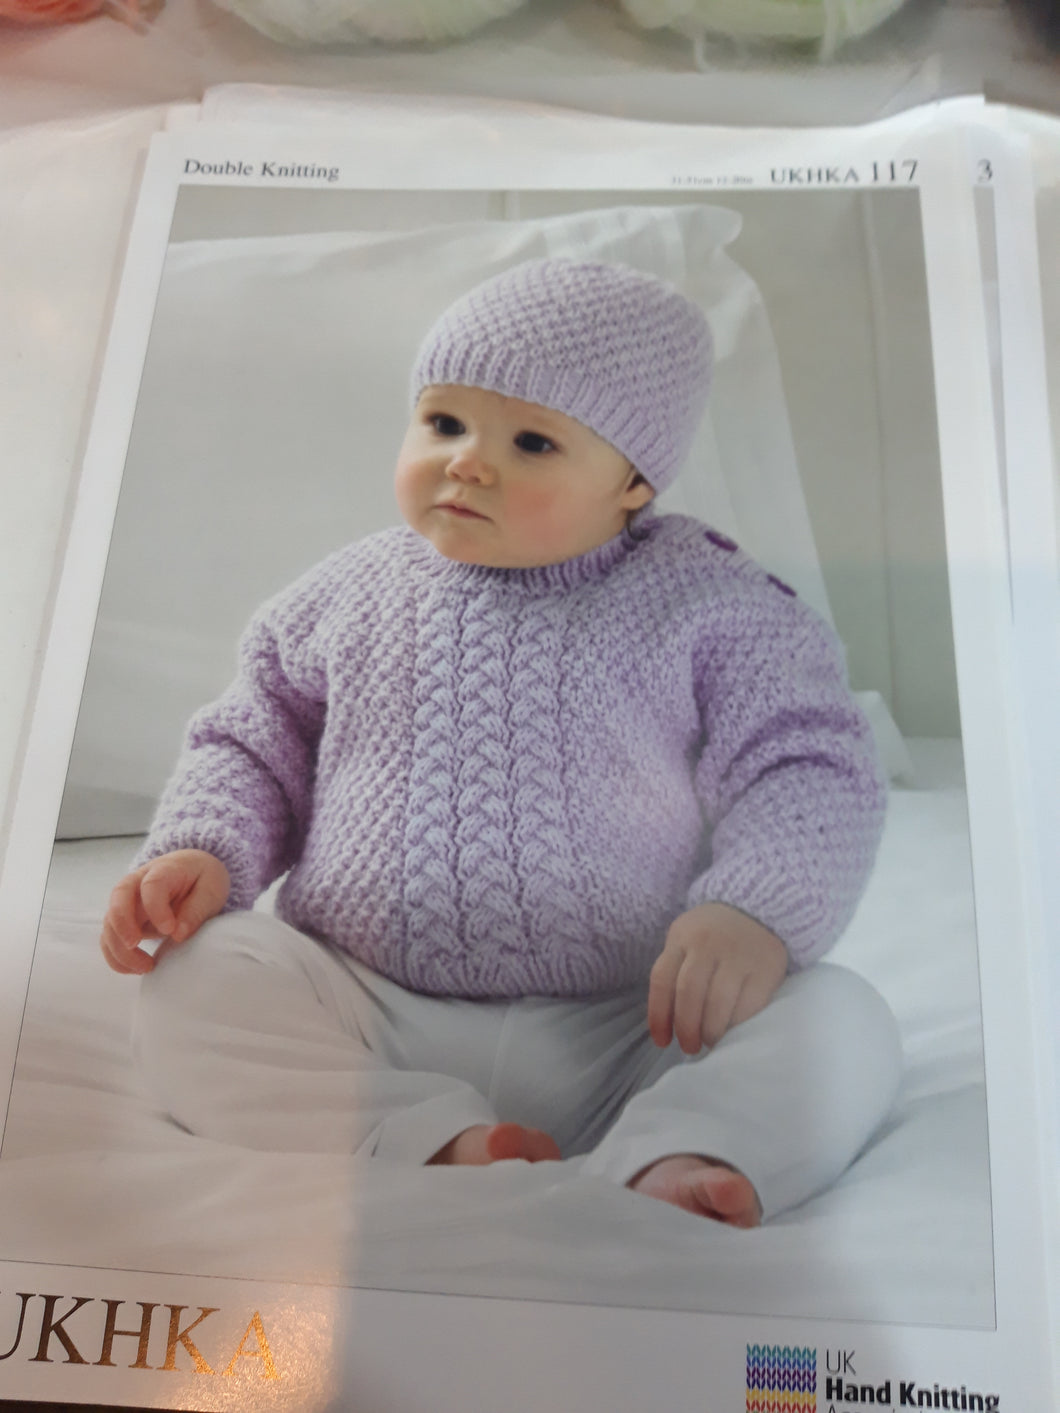 UKHKA 117 - Baby Double Knit - Jumpers, Hat and Scarf - 12